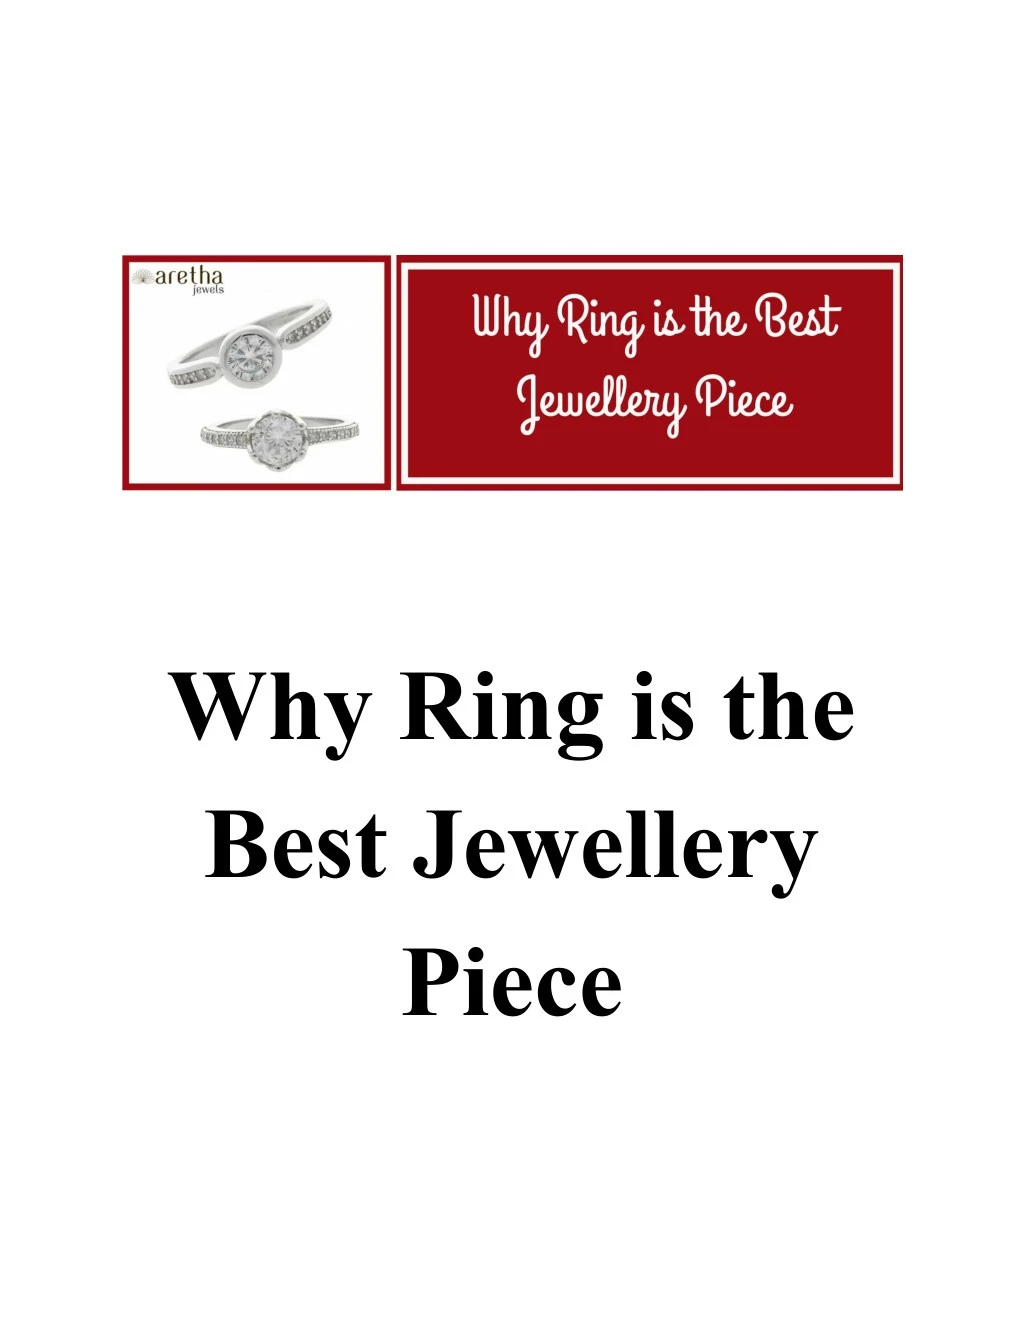 why ring is the best jewellery piece